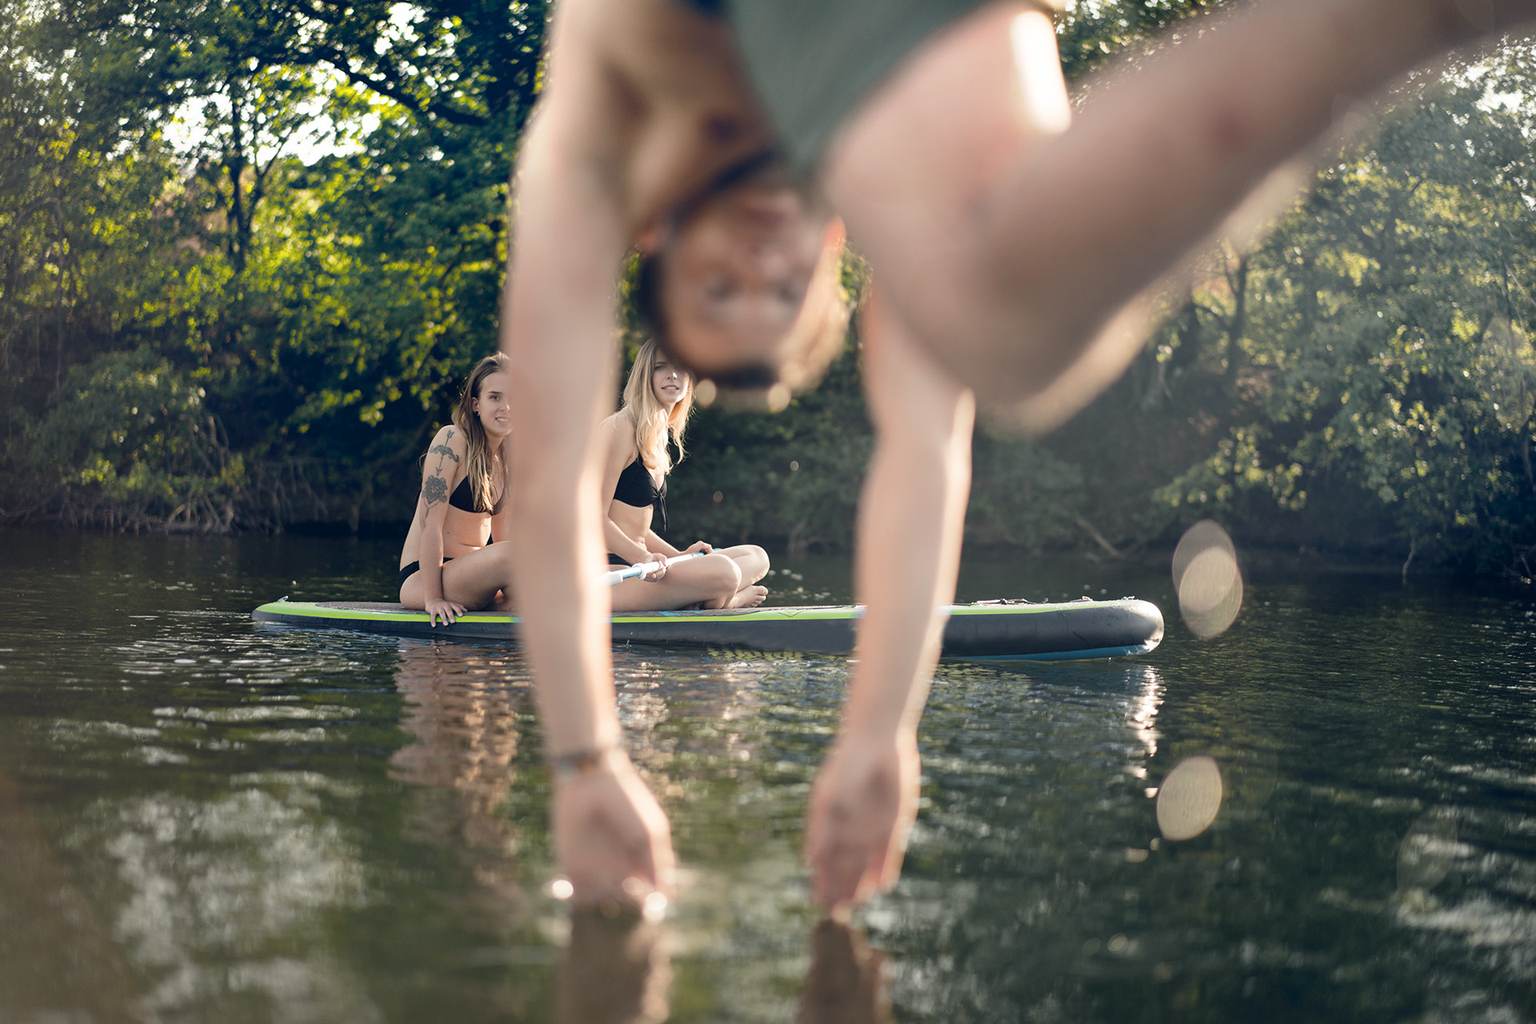 A man jumps head first into a river. In the background, two women sit on a paddle board.